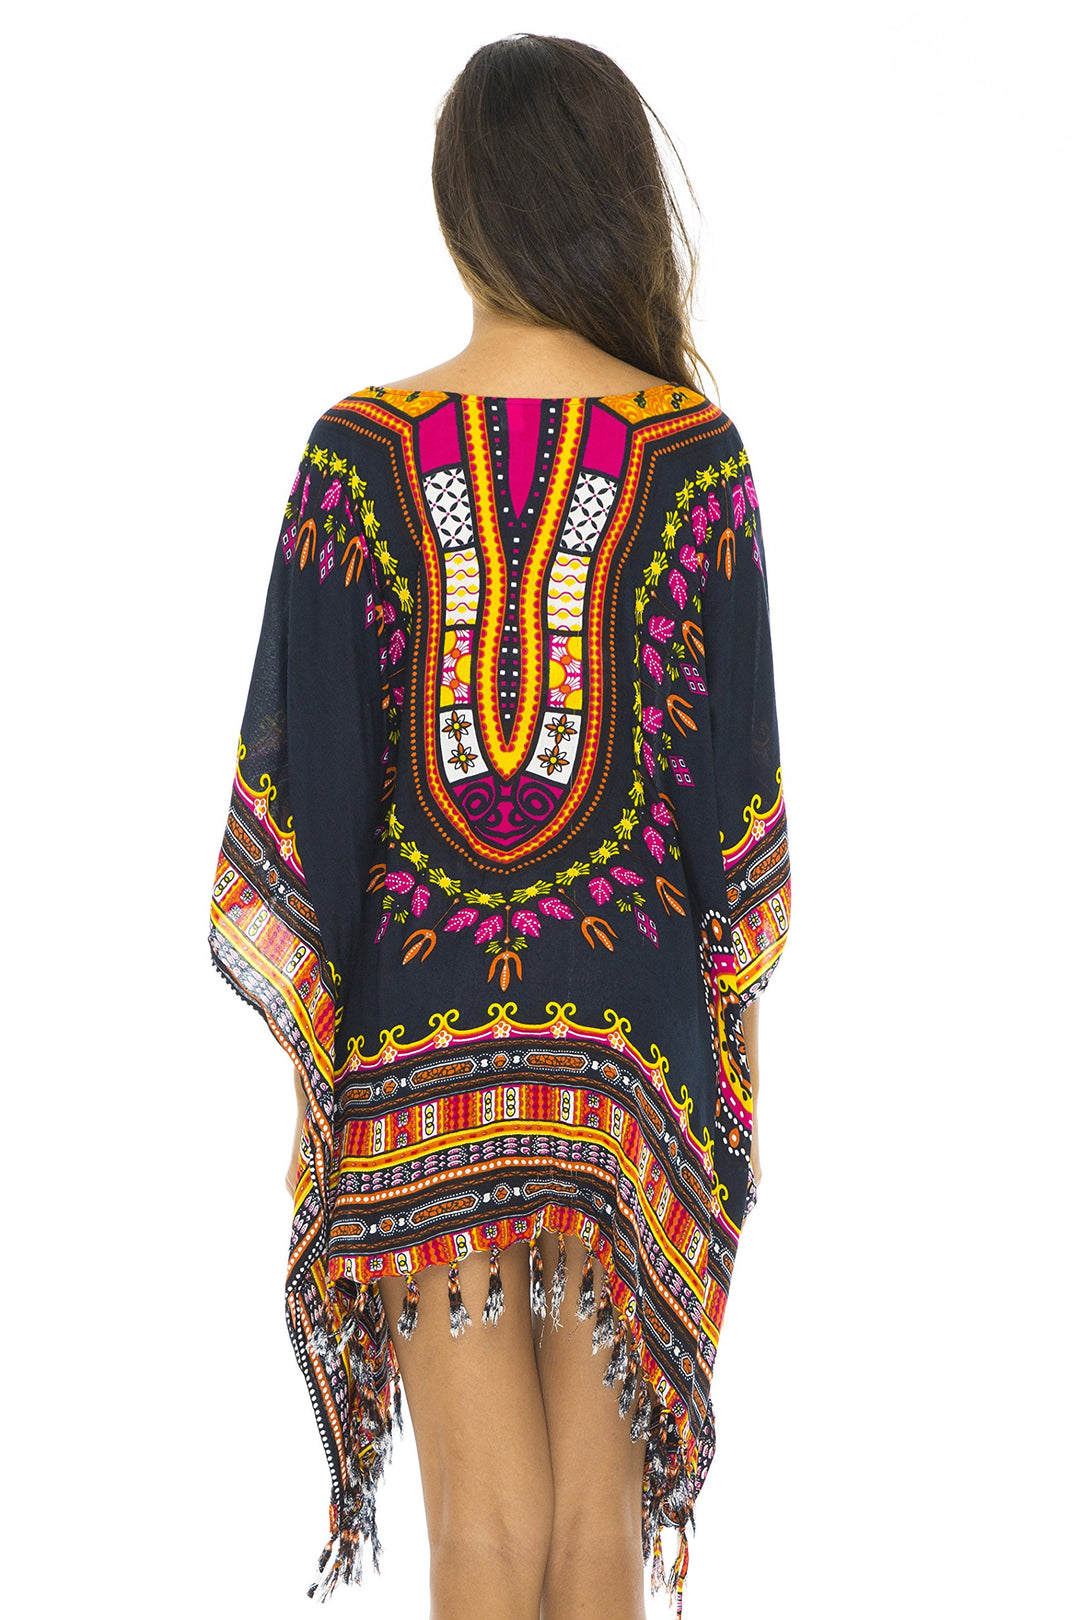 Back From Bali Womens Short Swimsuit Beach Cover Up African Caftan Patterns